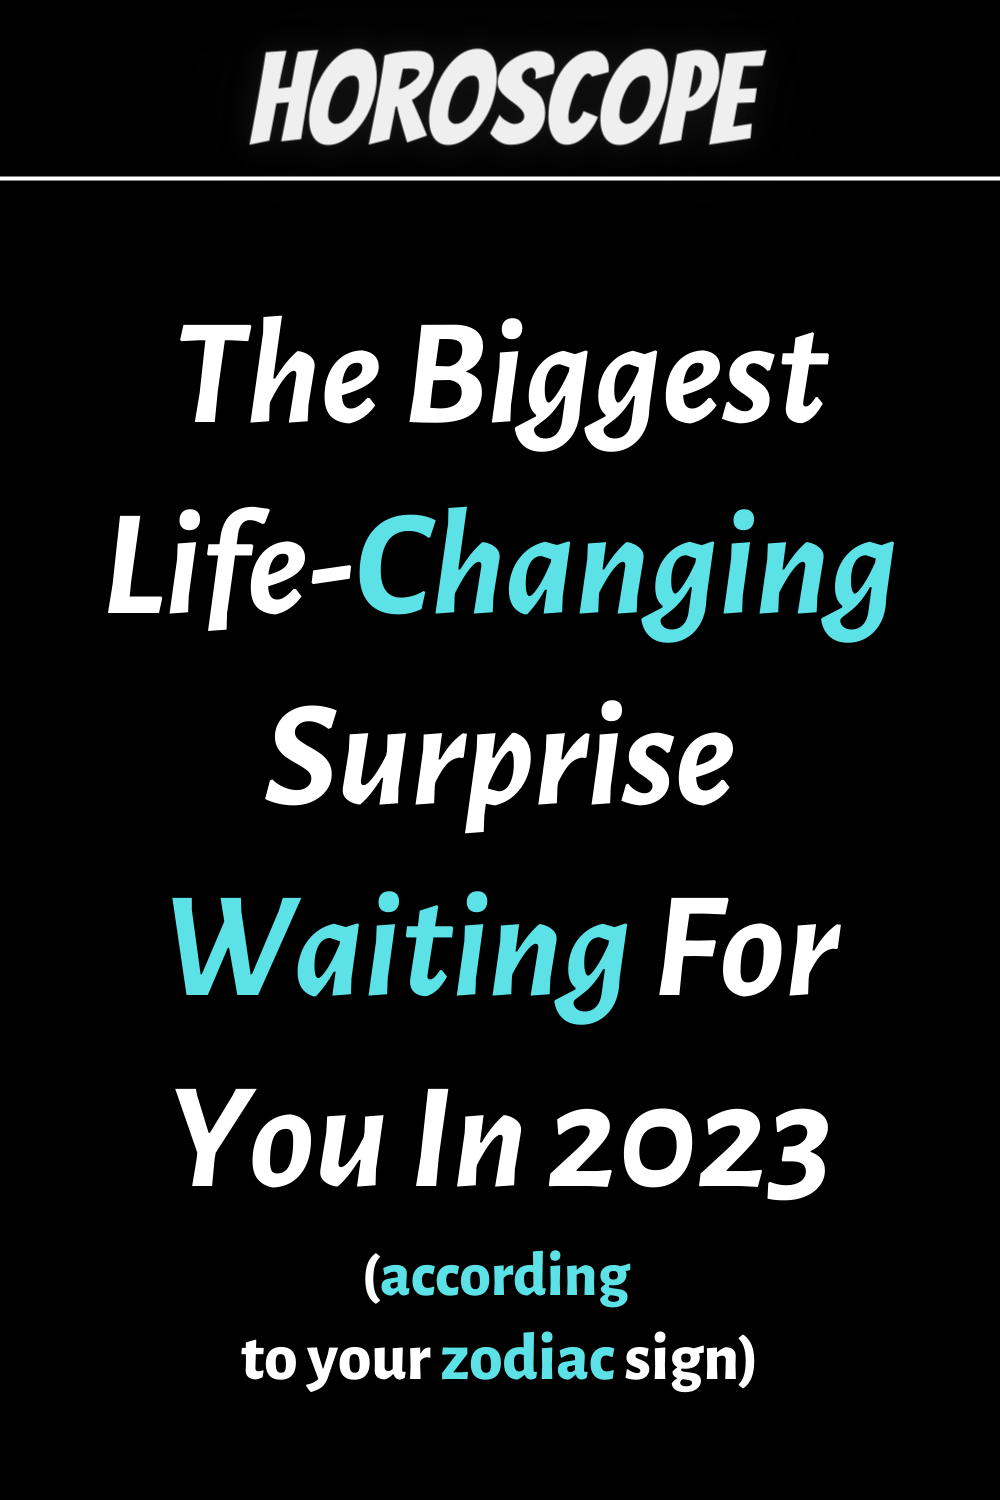 The Biggest Life-Changing Surprise Waiting For You In 2023